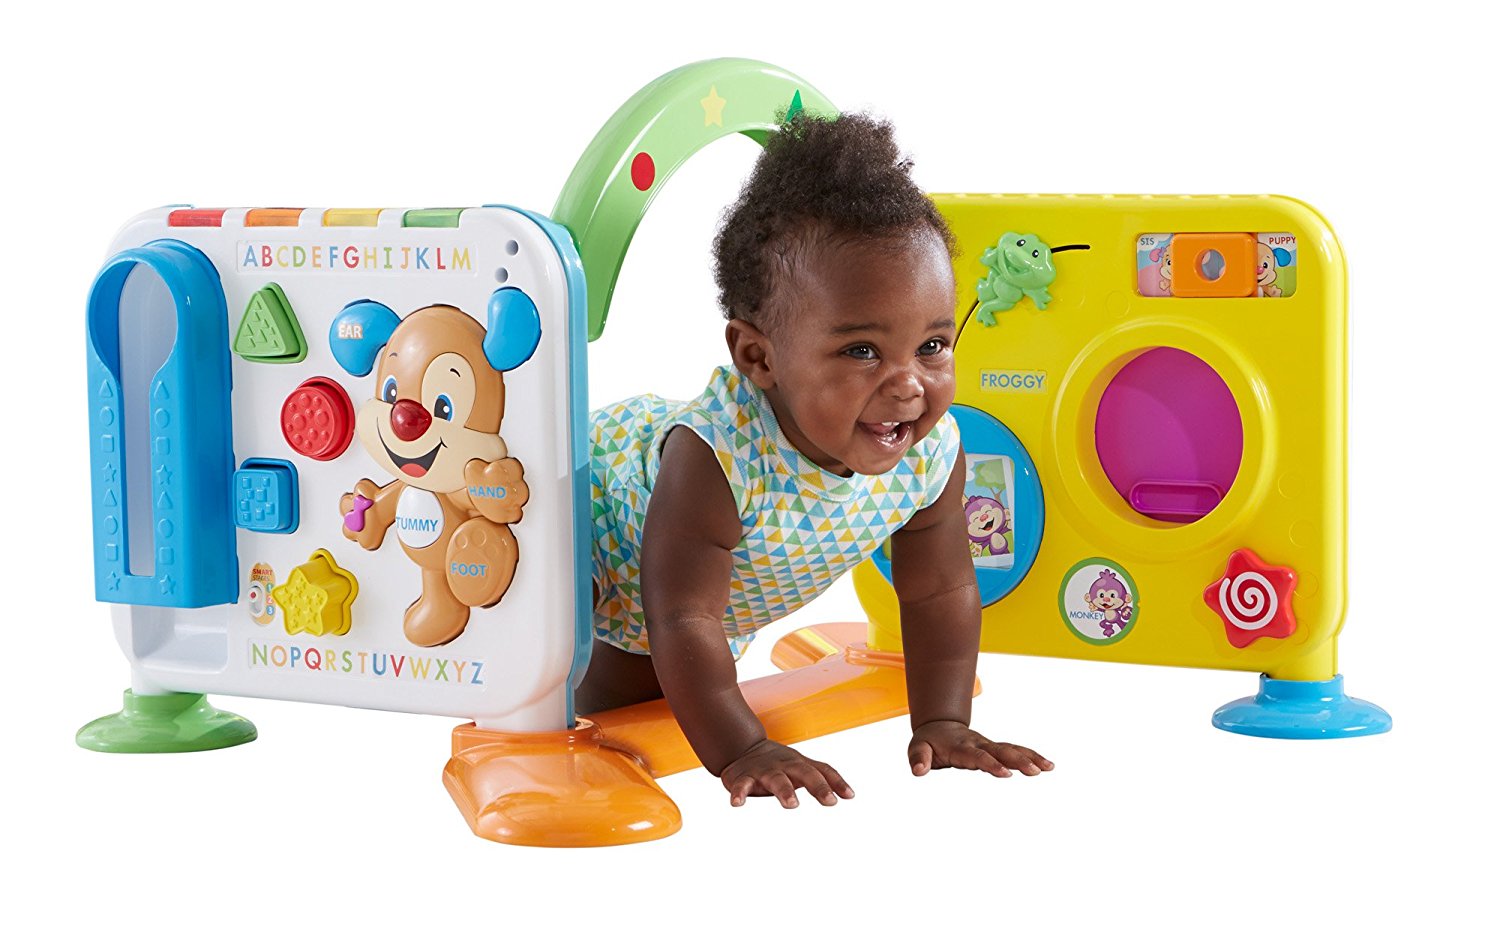 Fisher Price Laugh and Learn Crawl-Around Learning Center